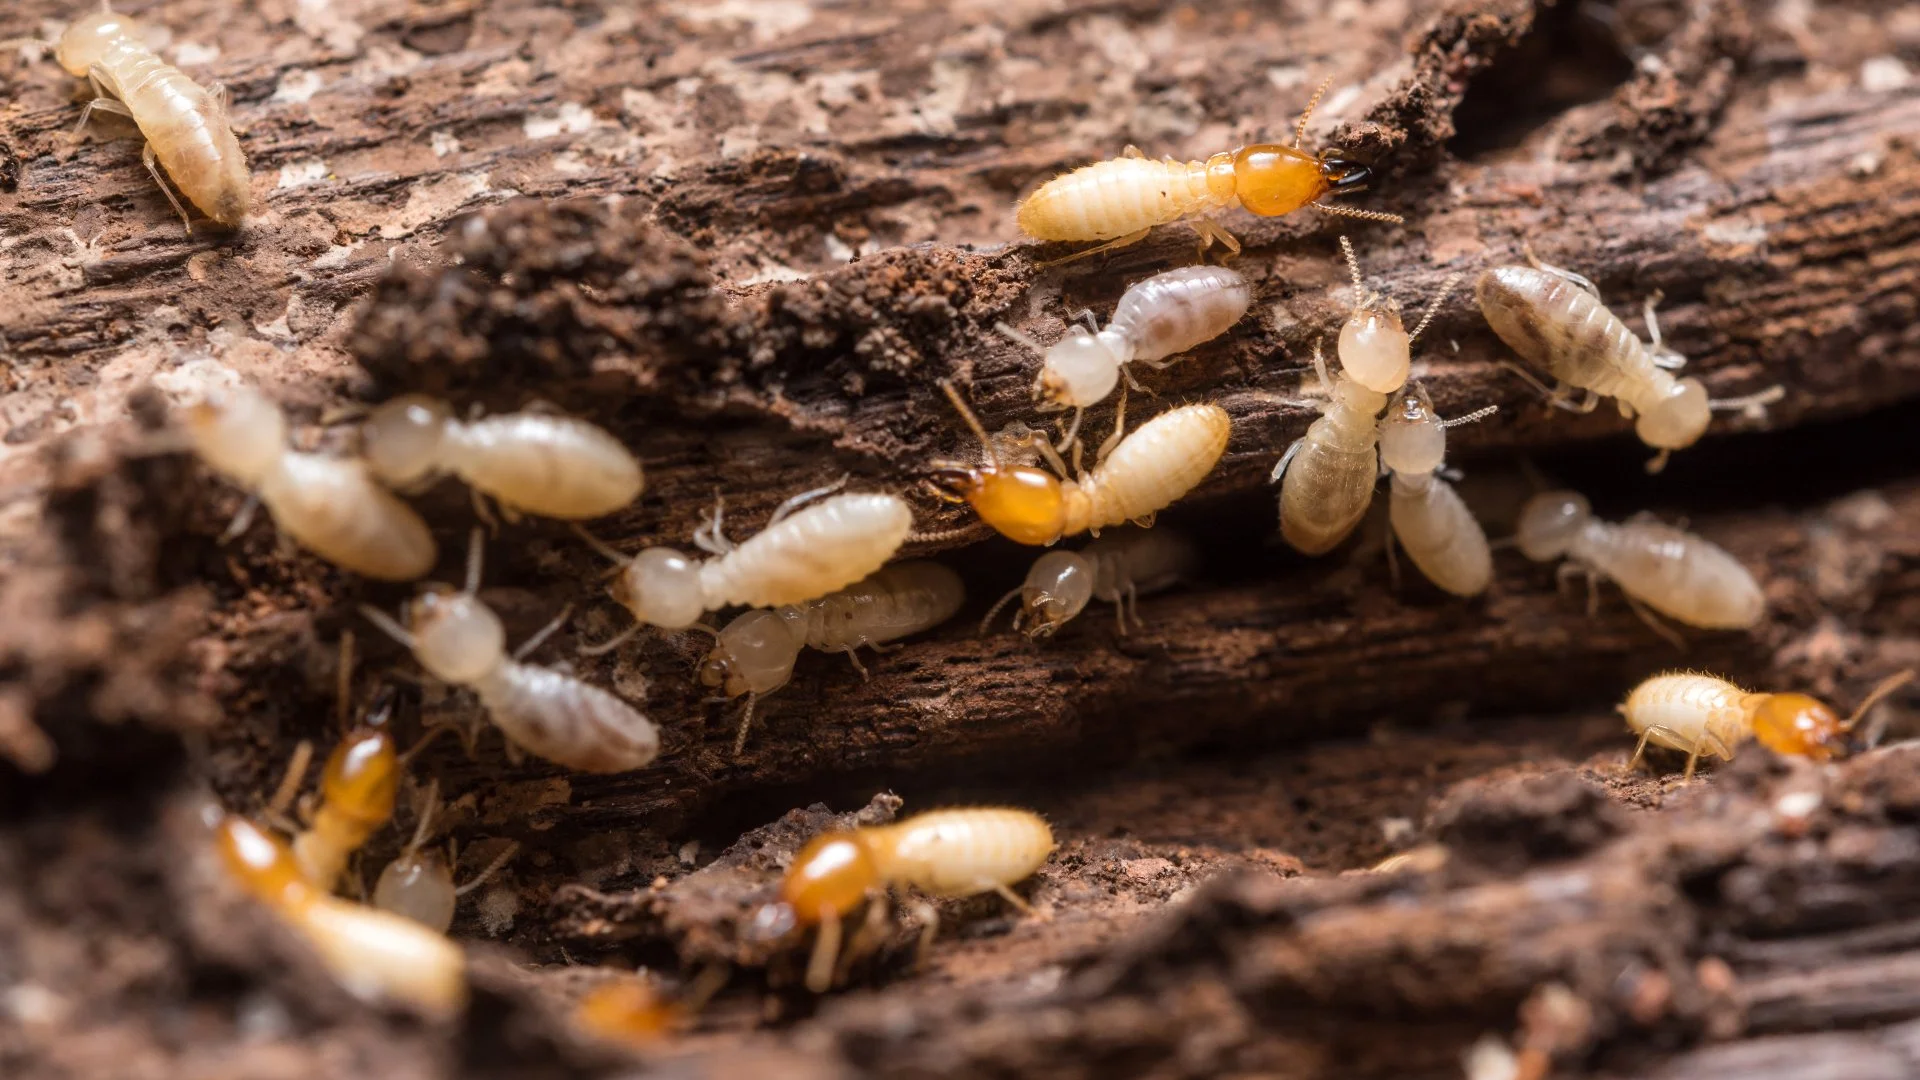 Regular Termite Inspections Can Help Catch an Infestation Before It Gets Worse!